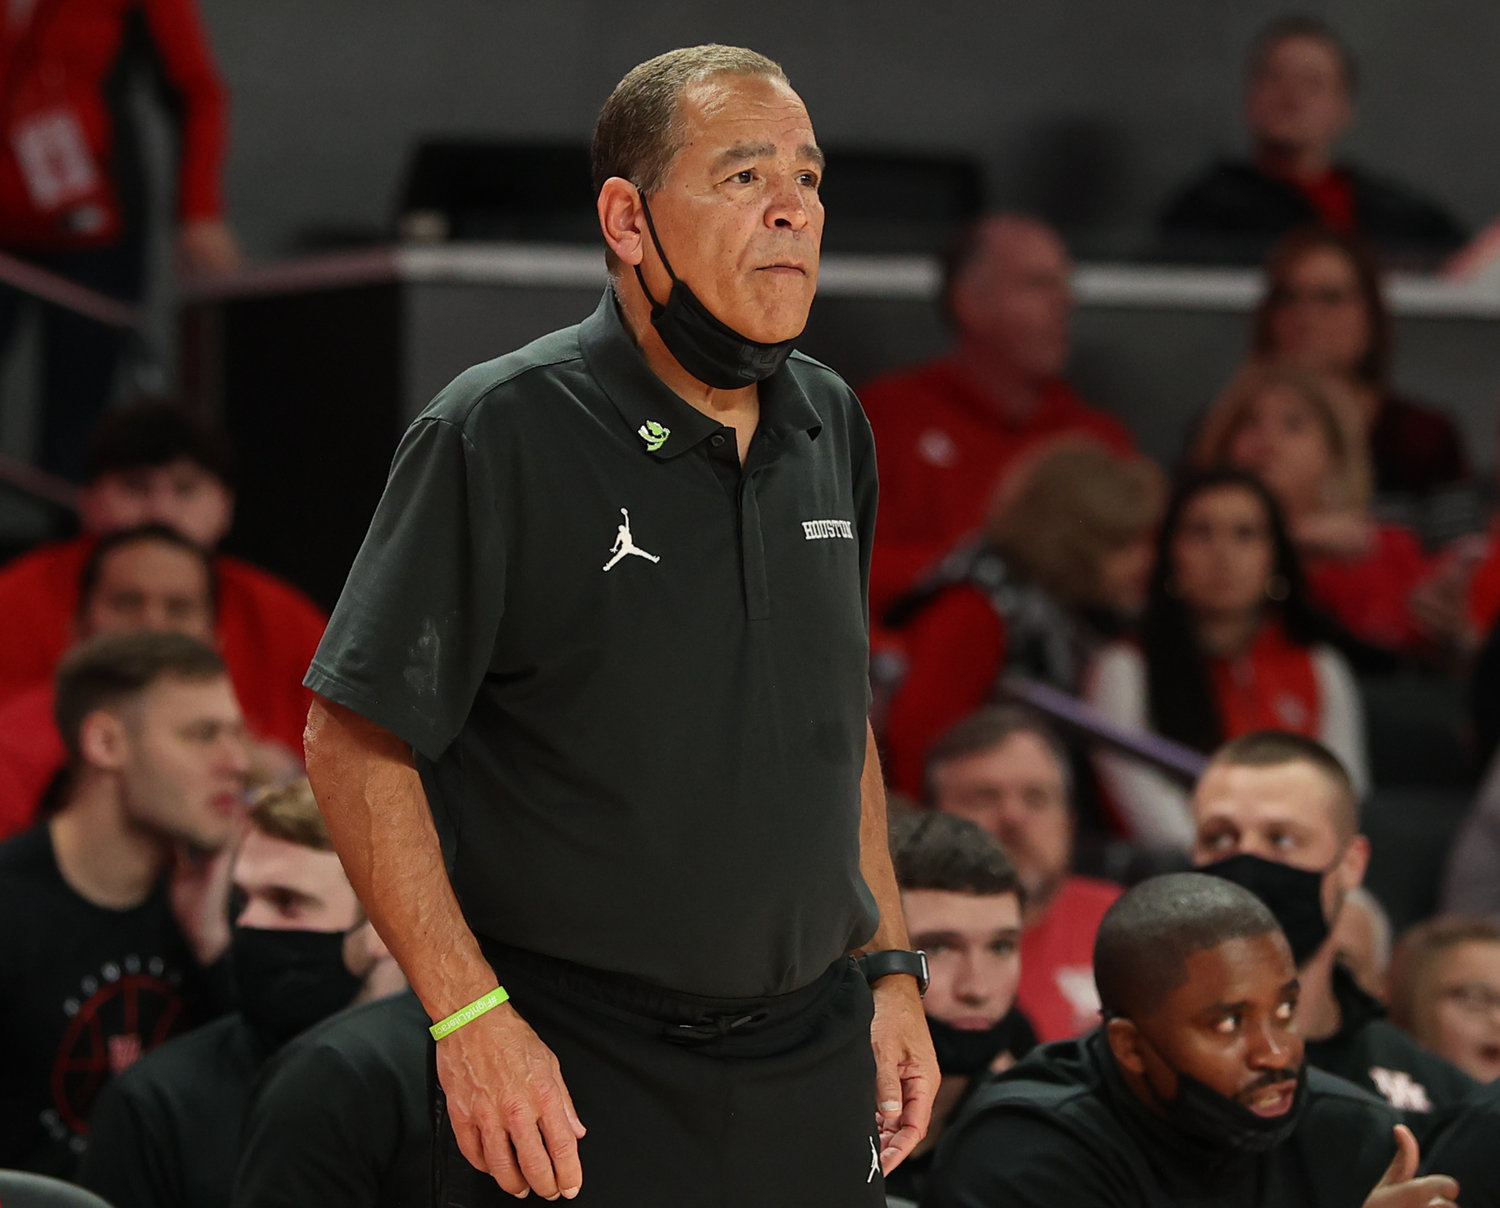 Houston Cougars head coach Kelvin Sampson during an NCAA men’s basketball game between Houston and Wichita State on Jan. 8, 2022 in Houston, Texas.